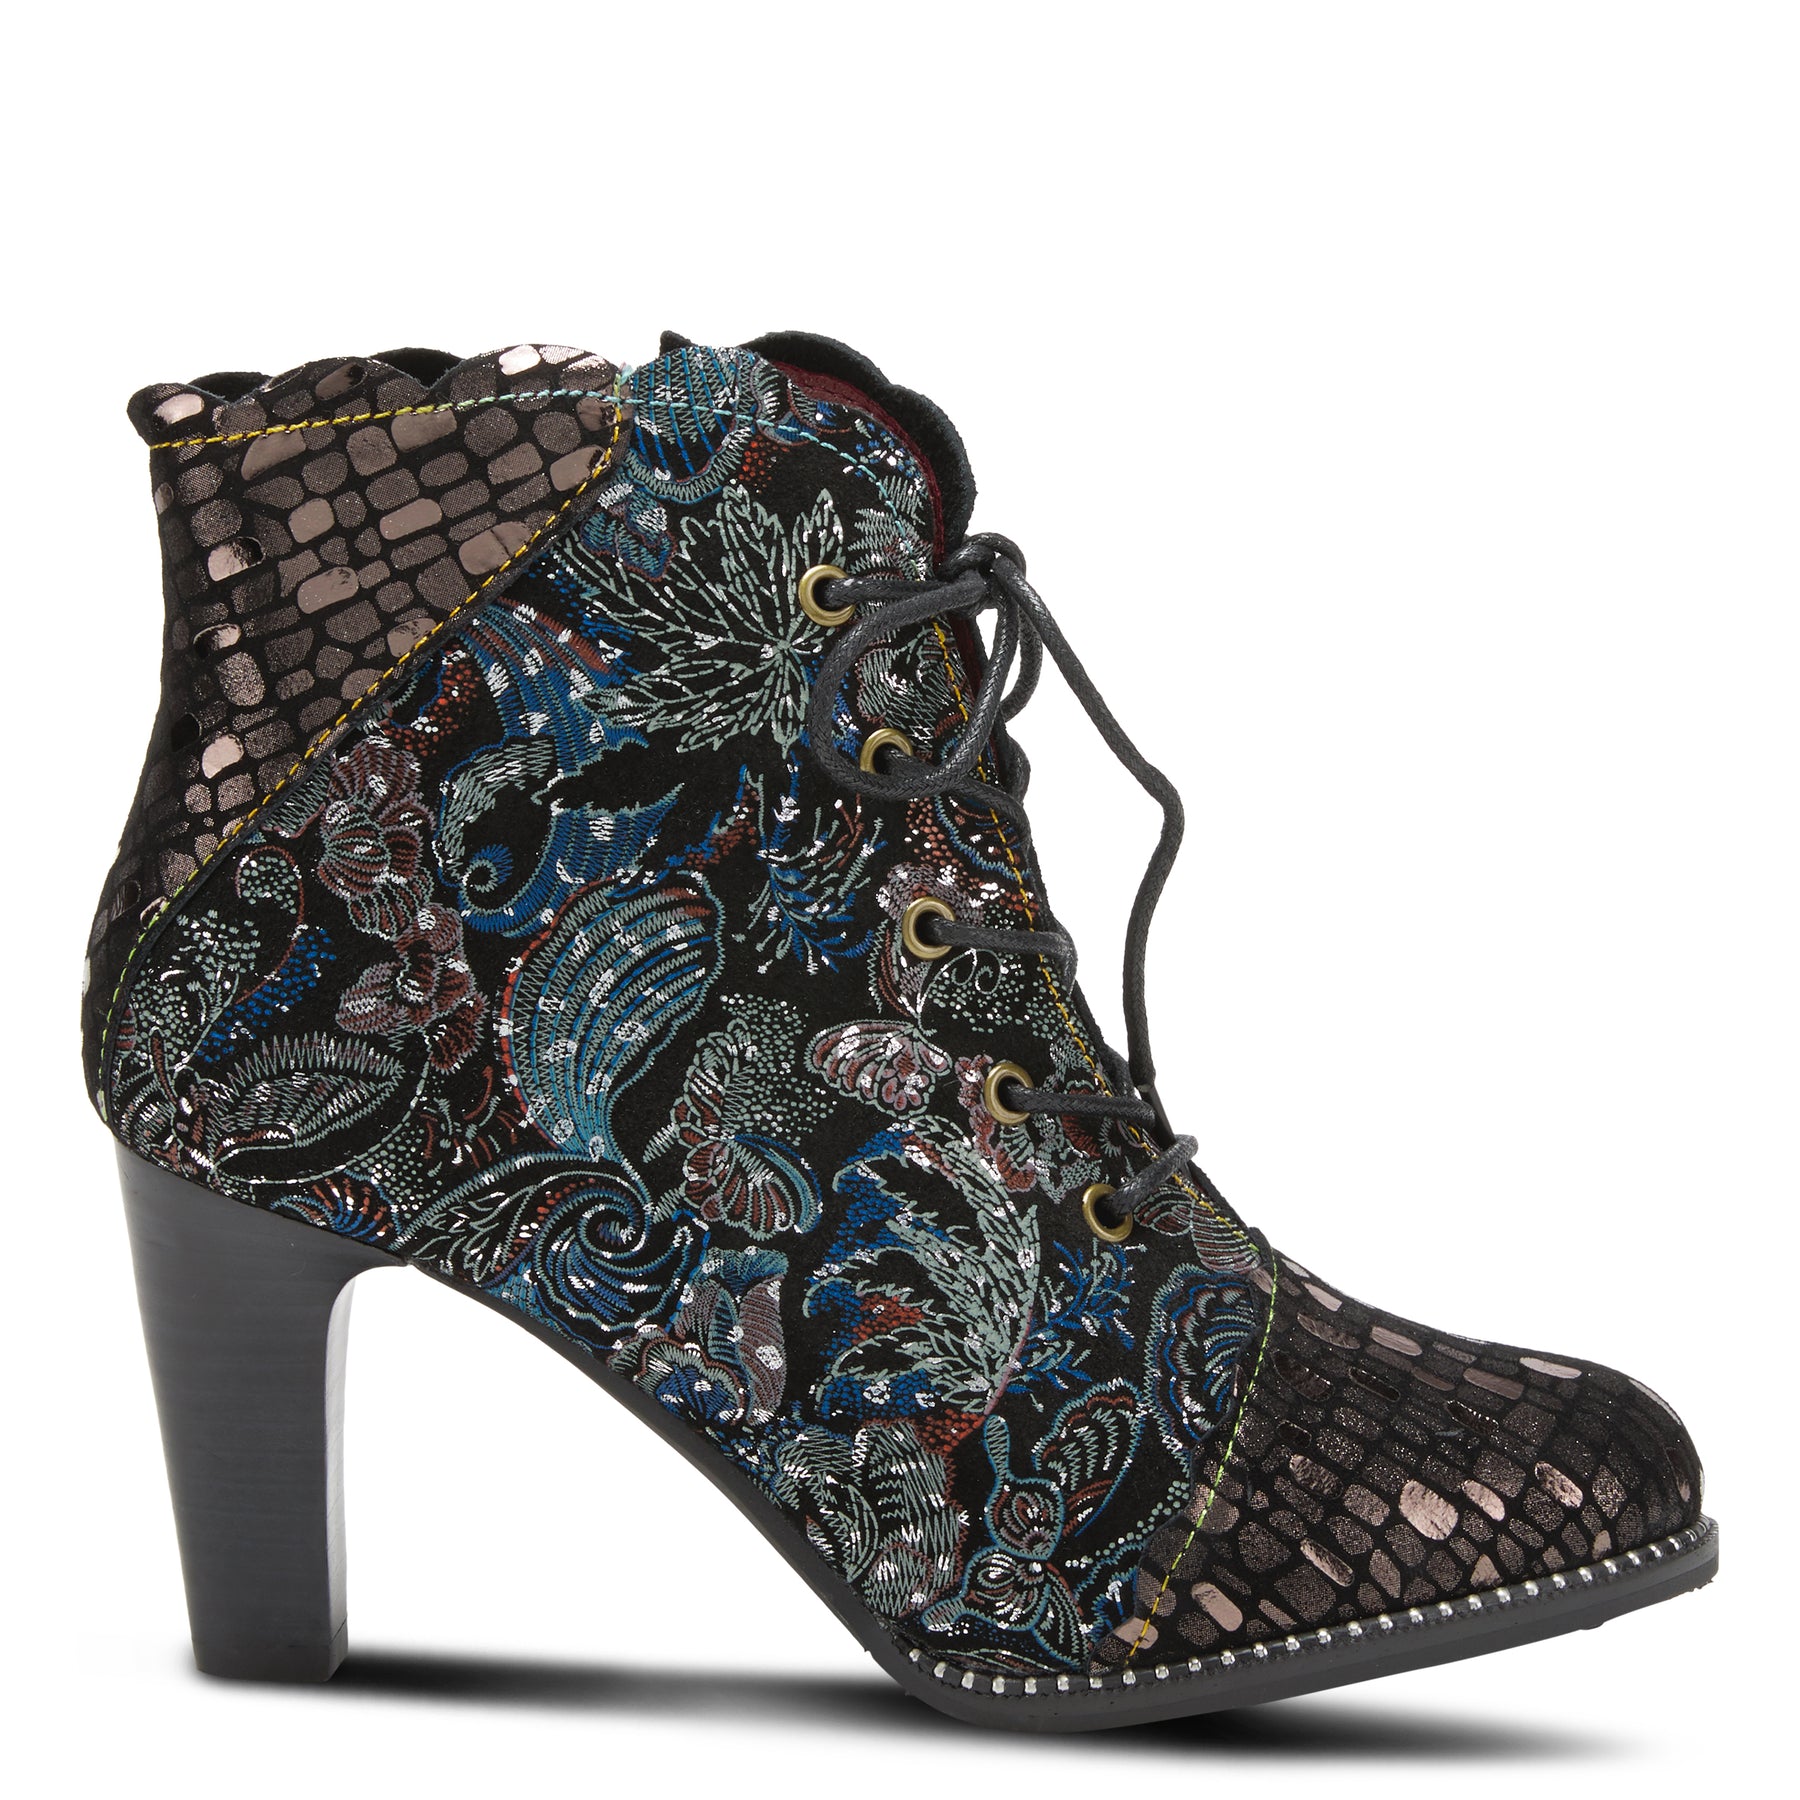 GLITTERAIL BOOTIE by L'ARTISTE – Spring Step Shoes